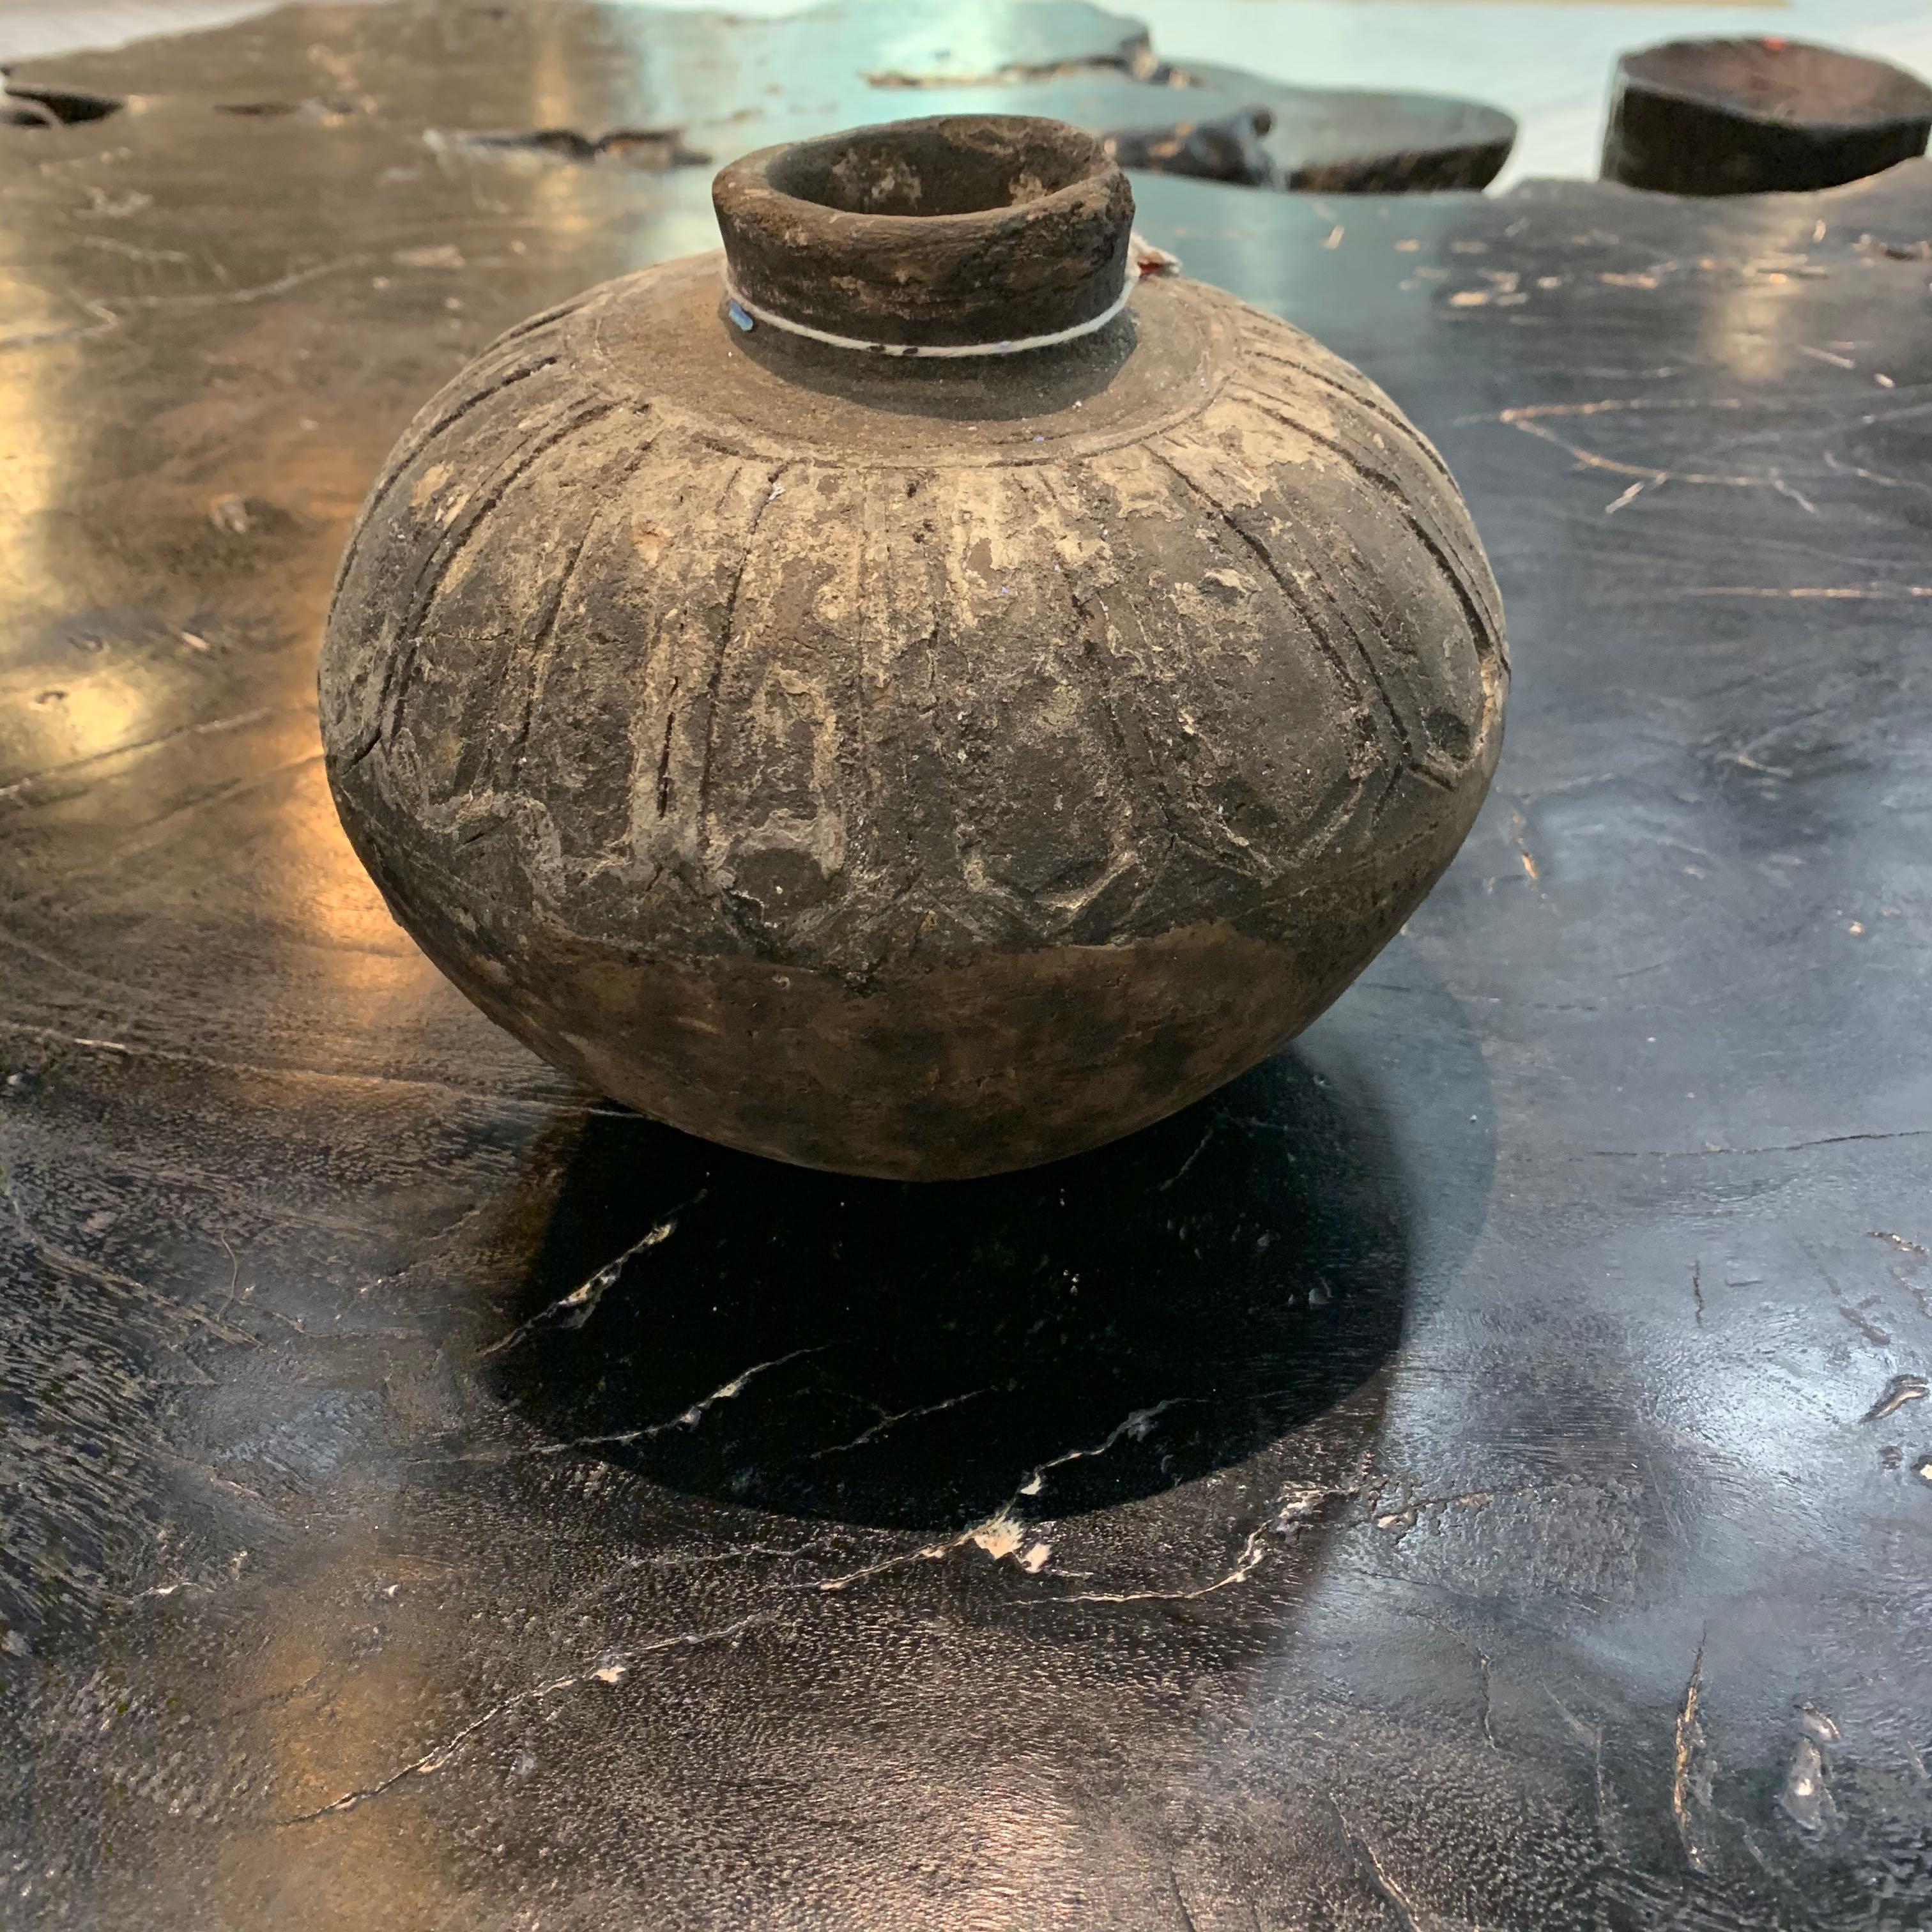 16th century Indonesian water vessel from the island of Sulawesi.
The brown terracotta vase has a beautiful decorative design and a natural weathered patina.
This vase is in very good condition for it's age.
   